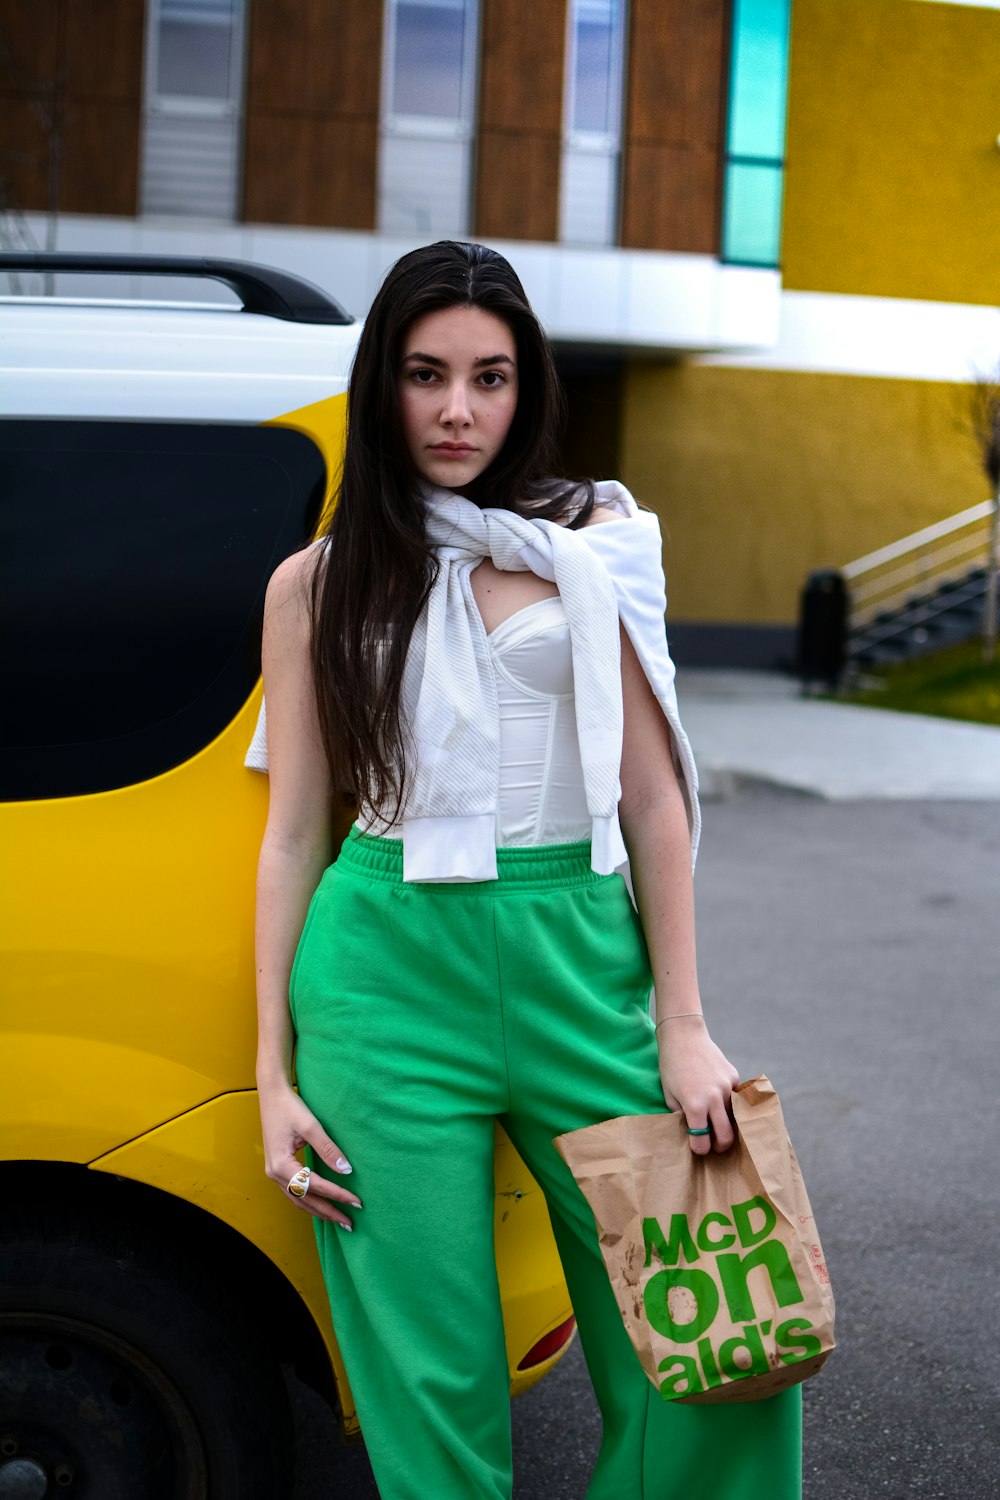 woman in white shirt and green shorts standing beside yellow car